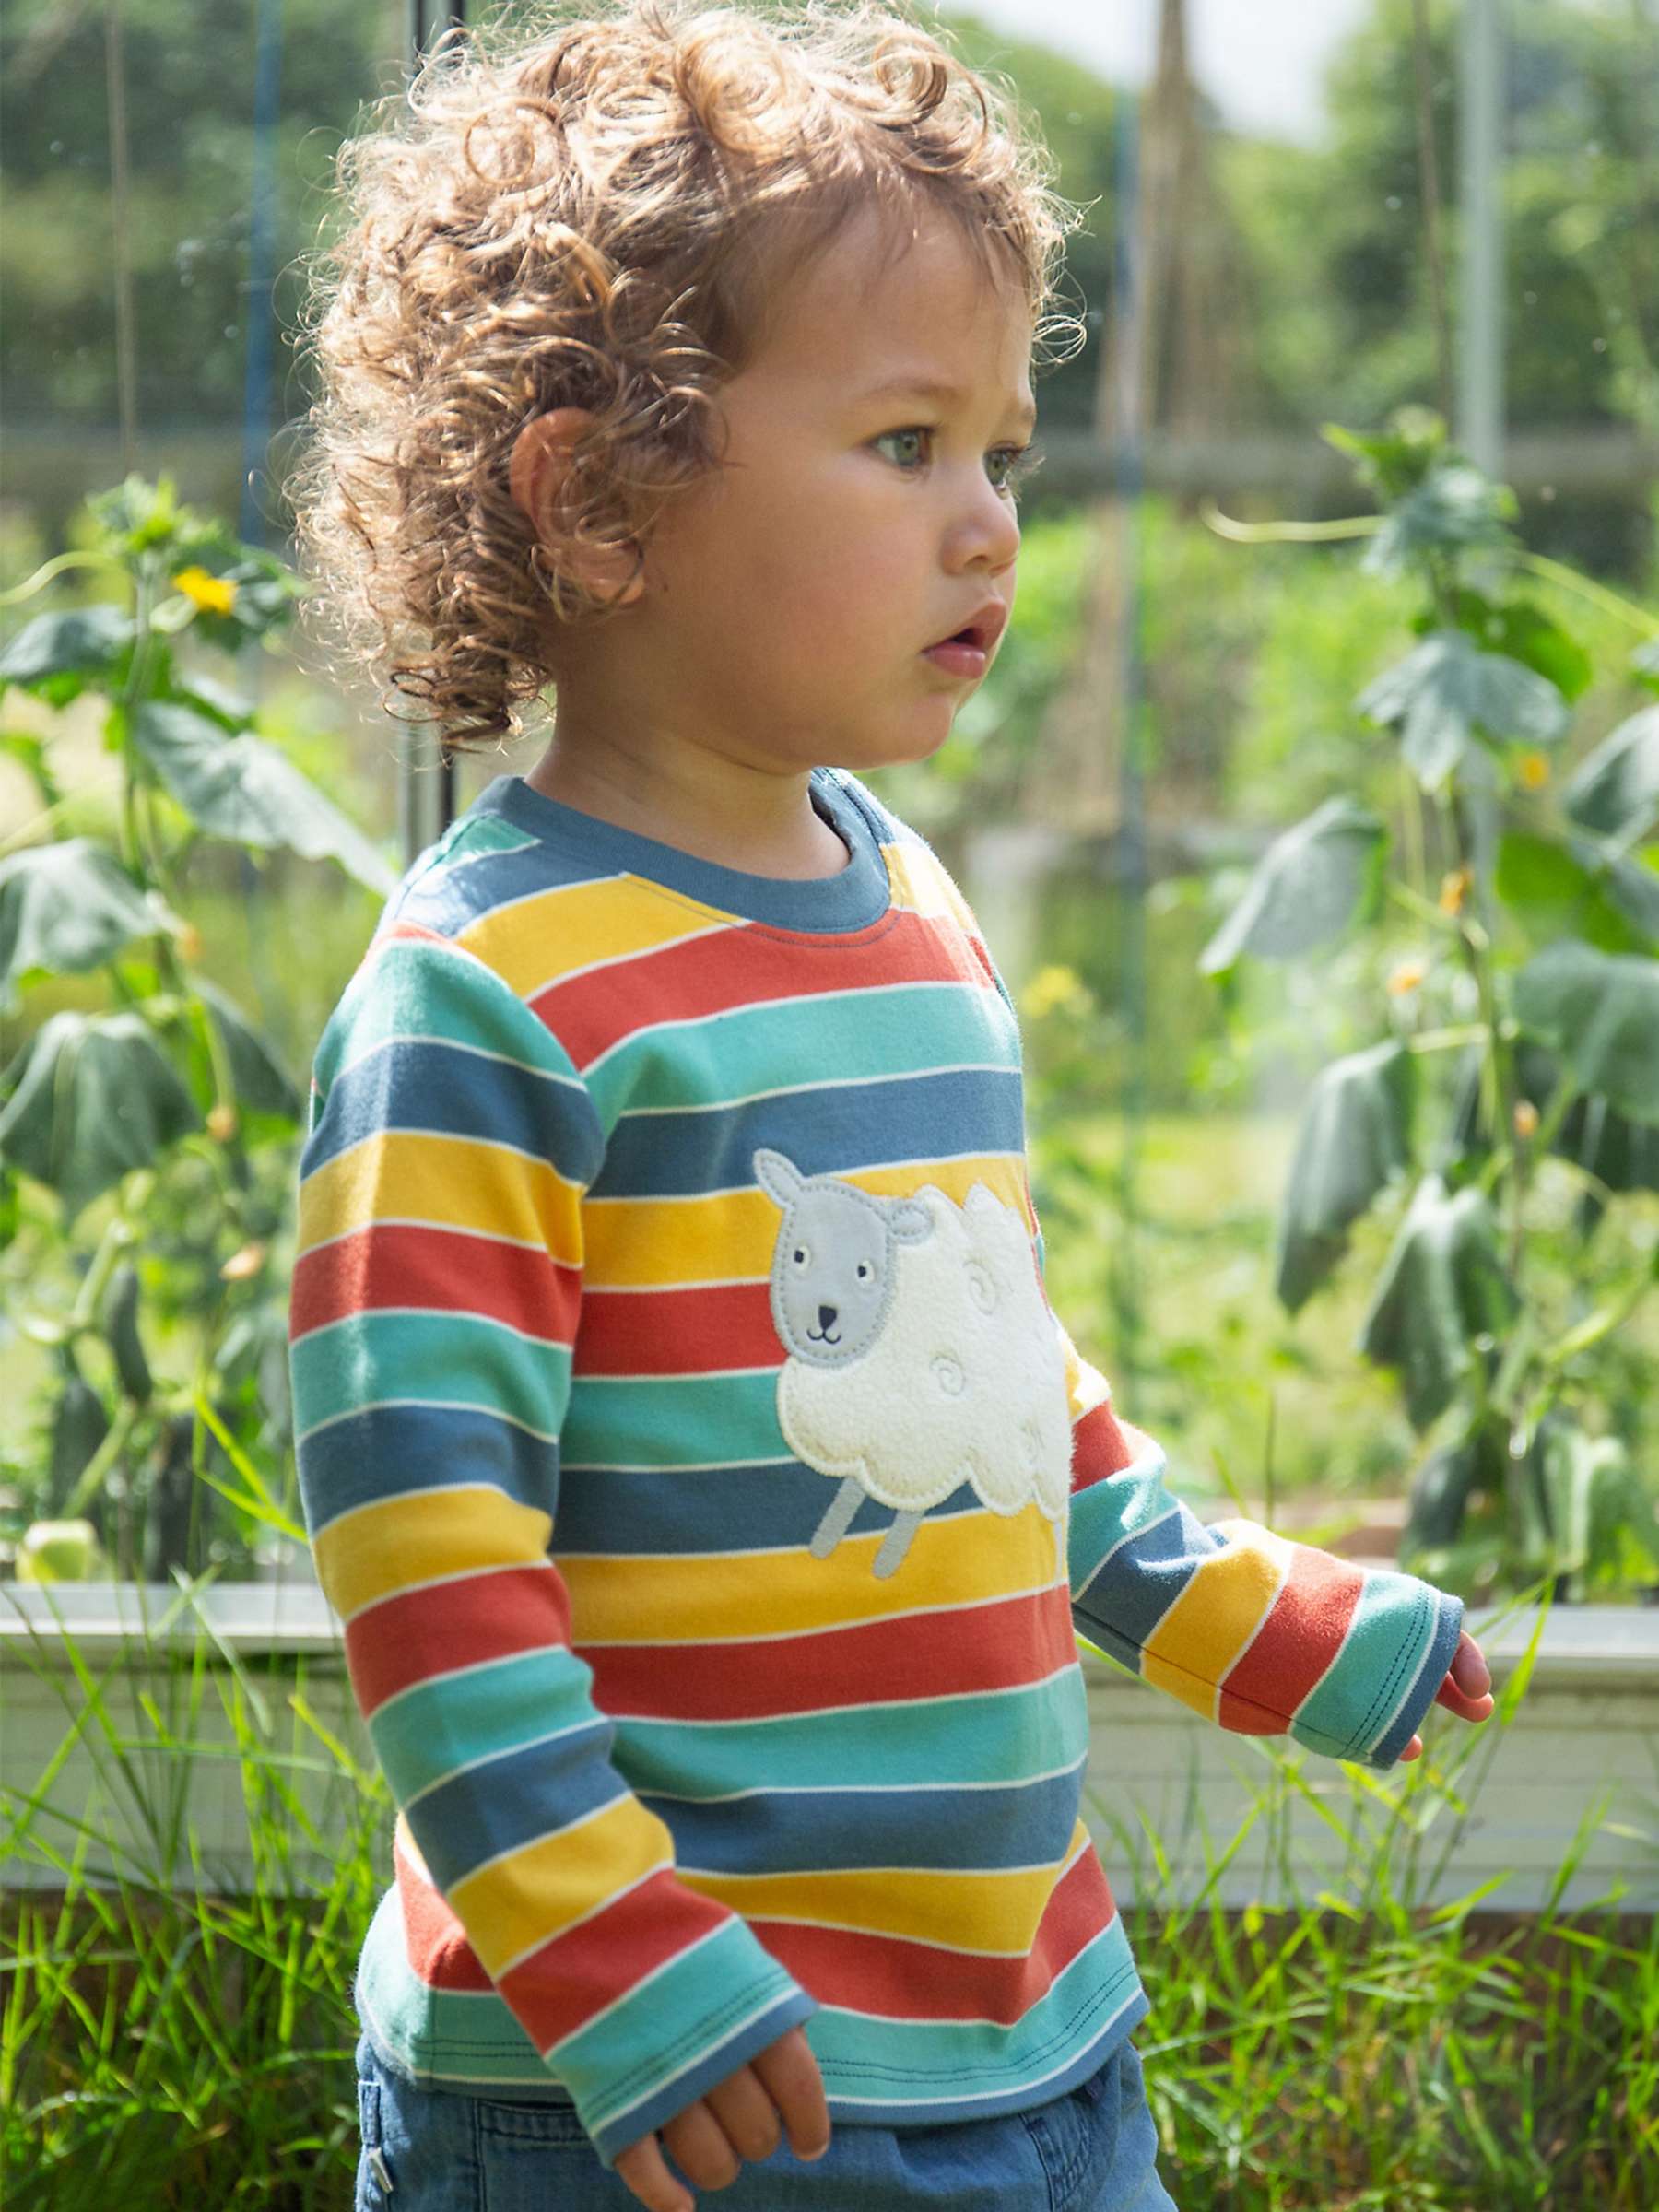 Buy Frugi Baby Discovery Applique Sheep Organic Cotton Top, Multi Online at johnlewis.com